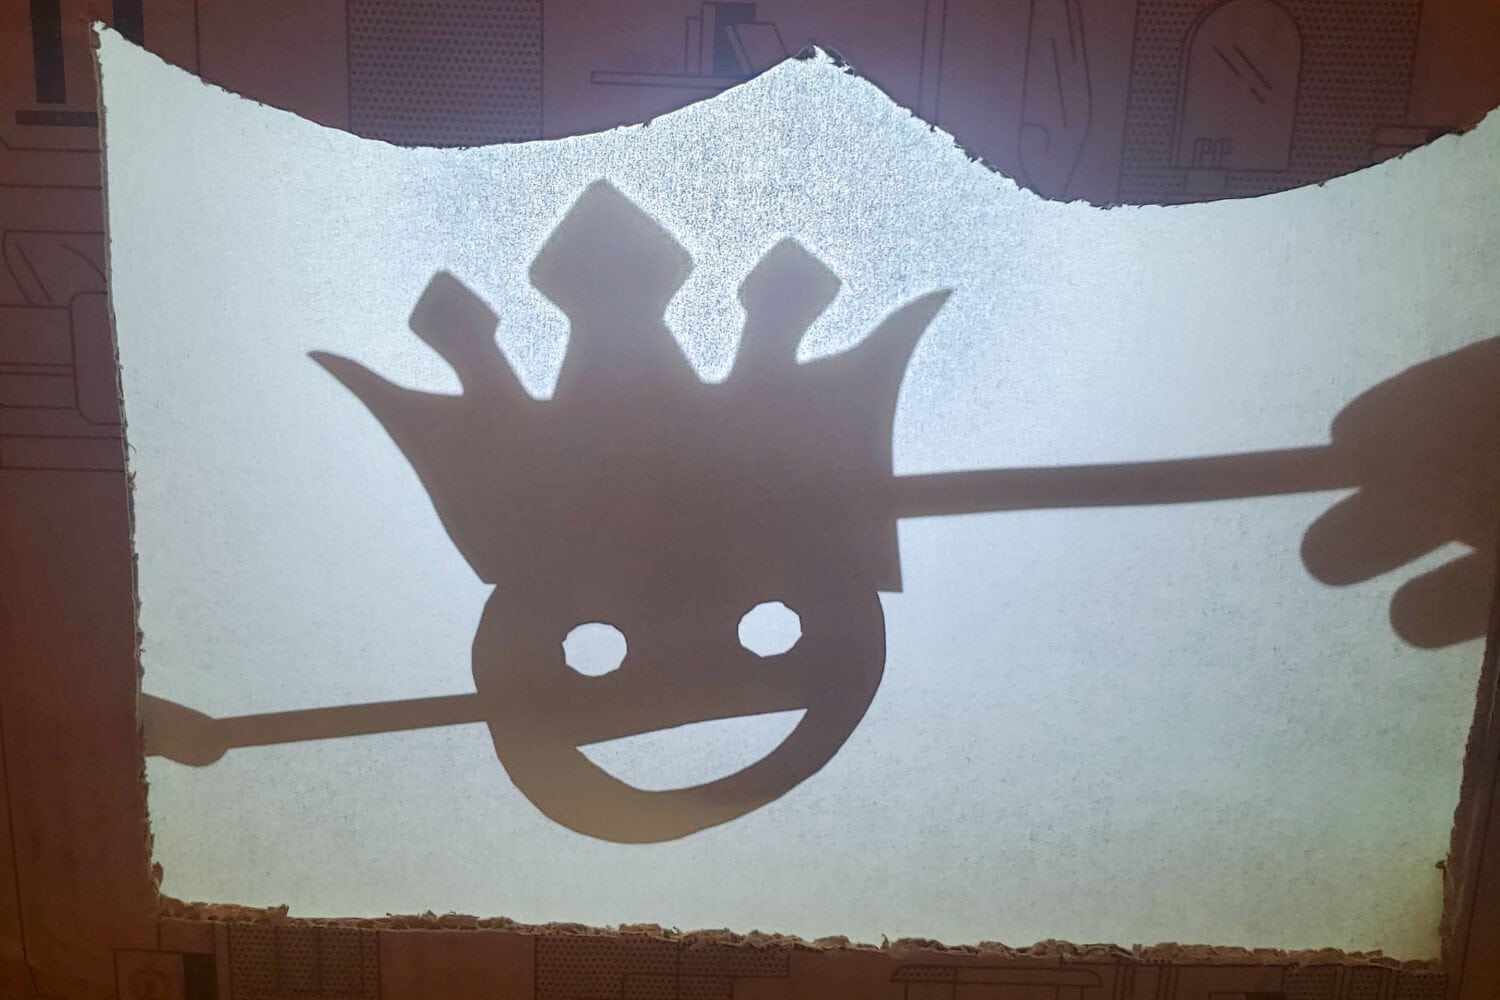 Redeemer of Israel Shadow Puppets singing time - smiley face and crown puppets